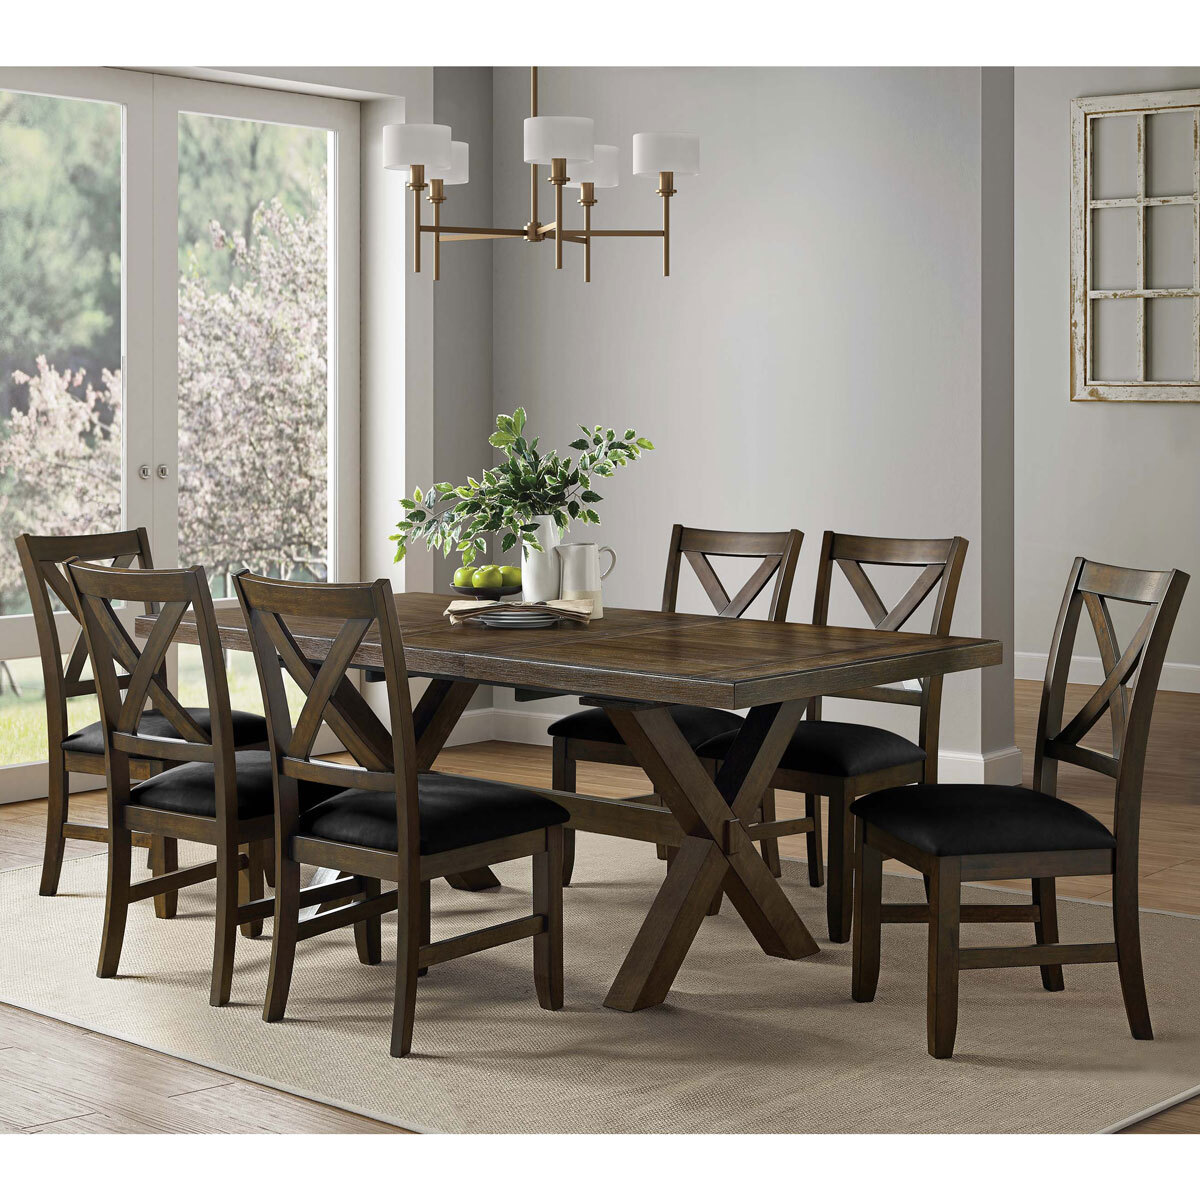 Bayside Furnishings Braeden Extending Dining Table  + 6 Cross Back Chairs, Seats 4-8